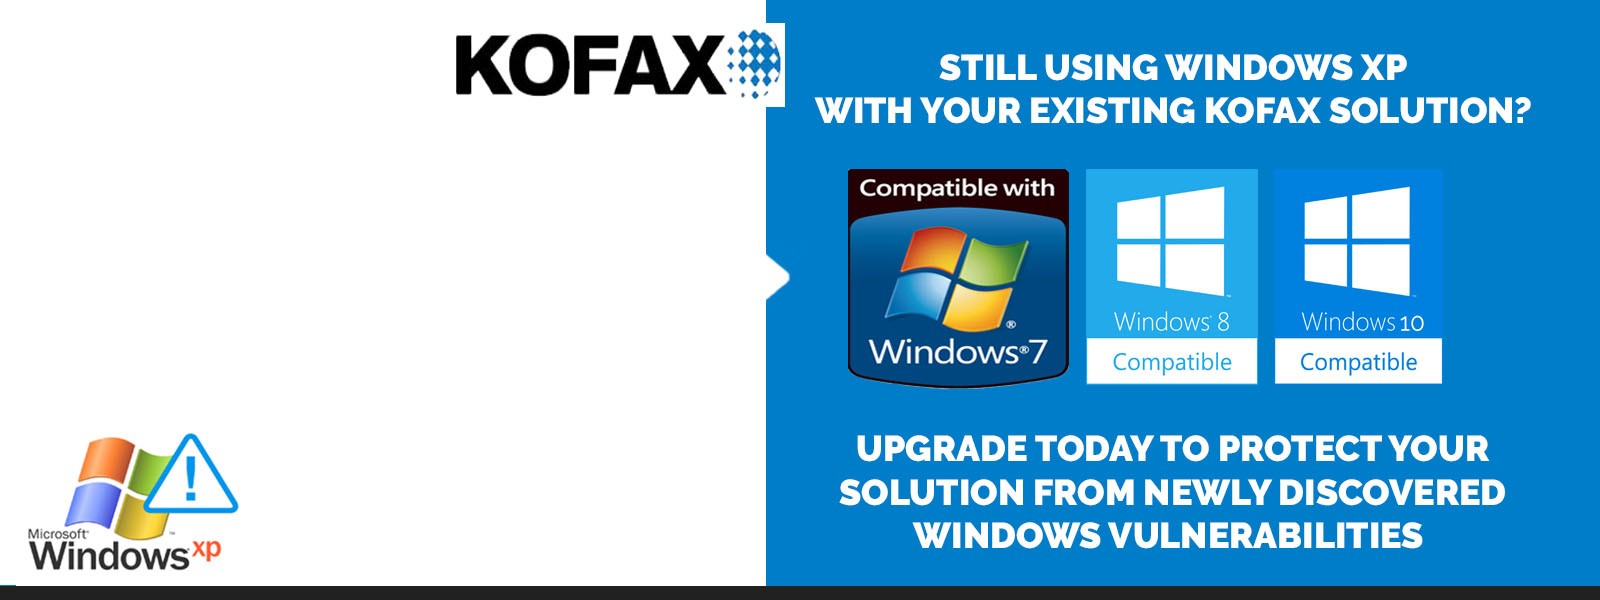 Is It Time To Upgrade Your Kofax Solution?
Request A FREE Consultation